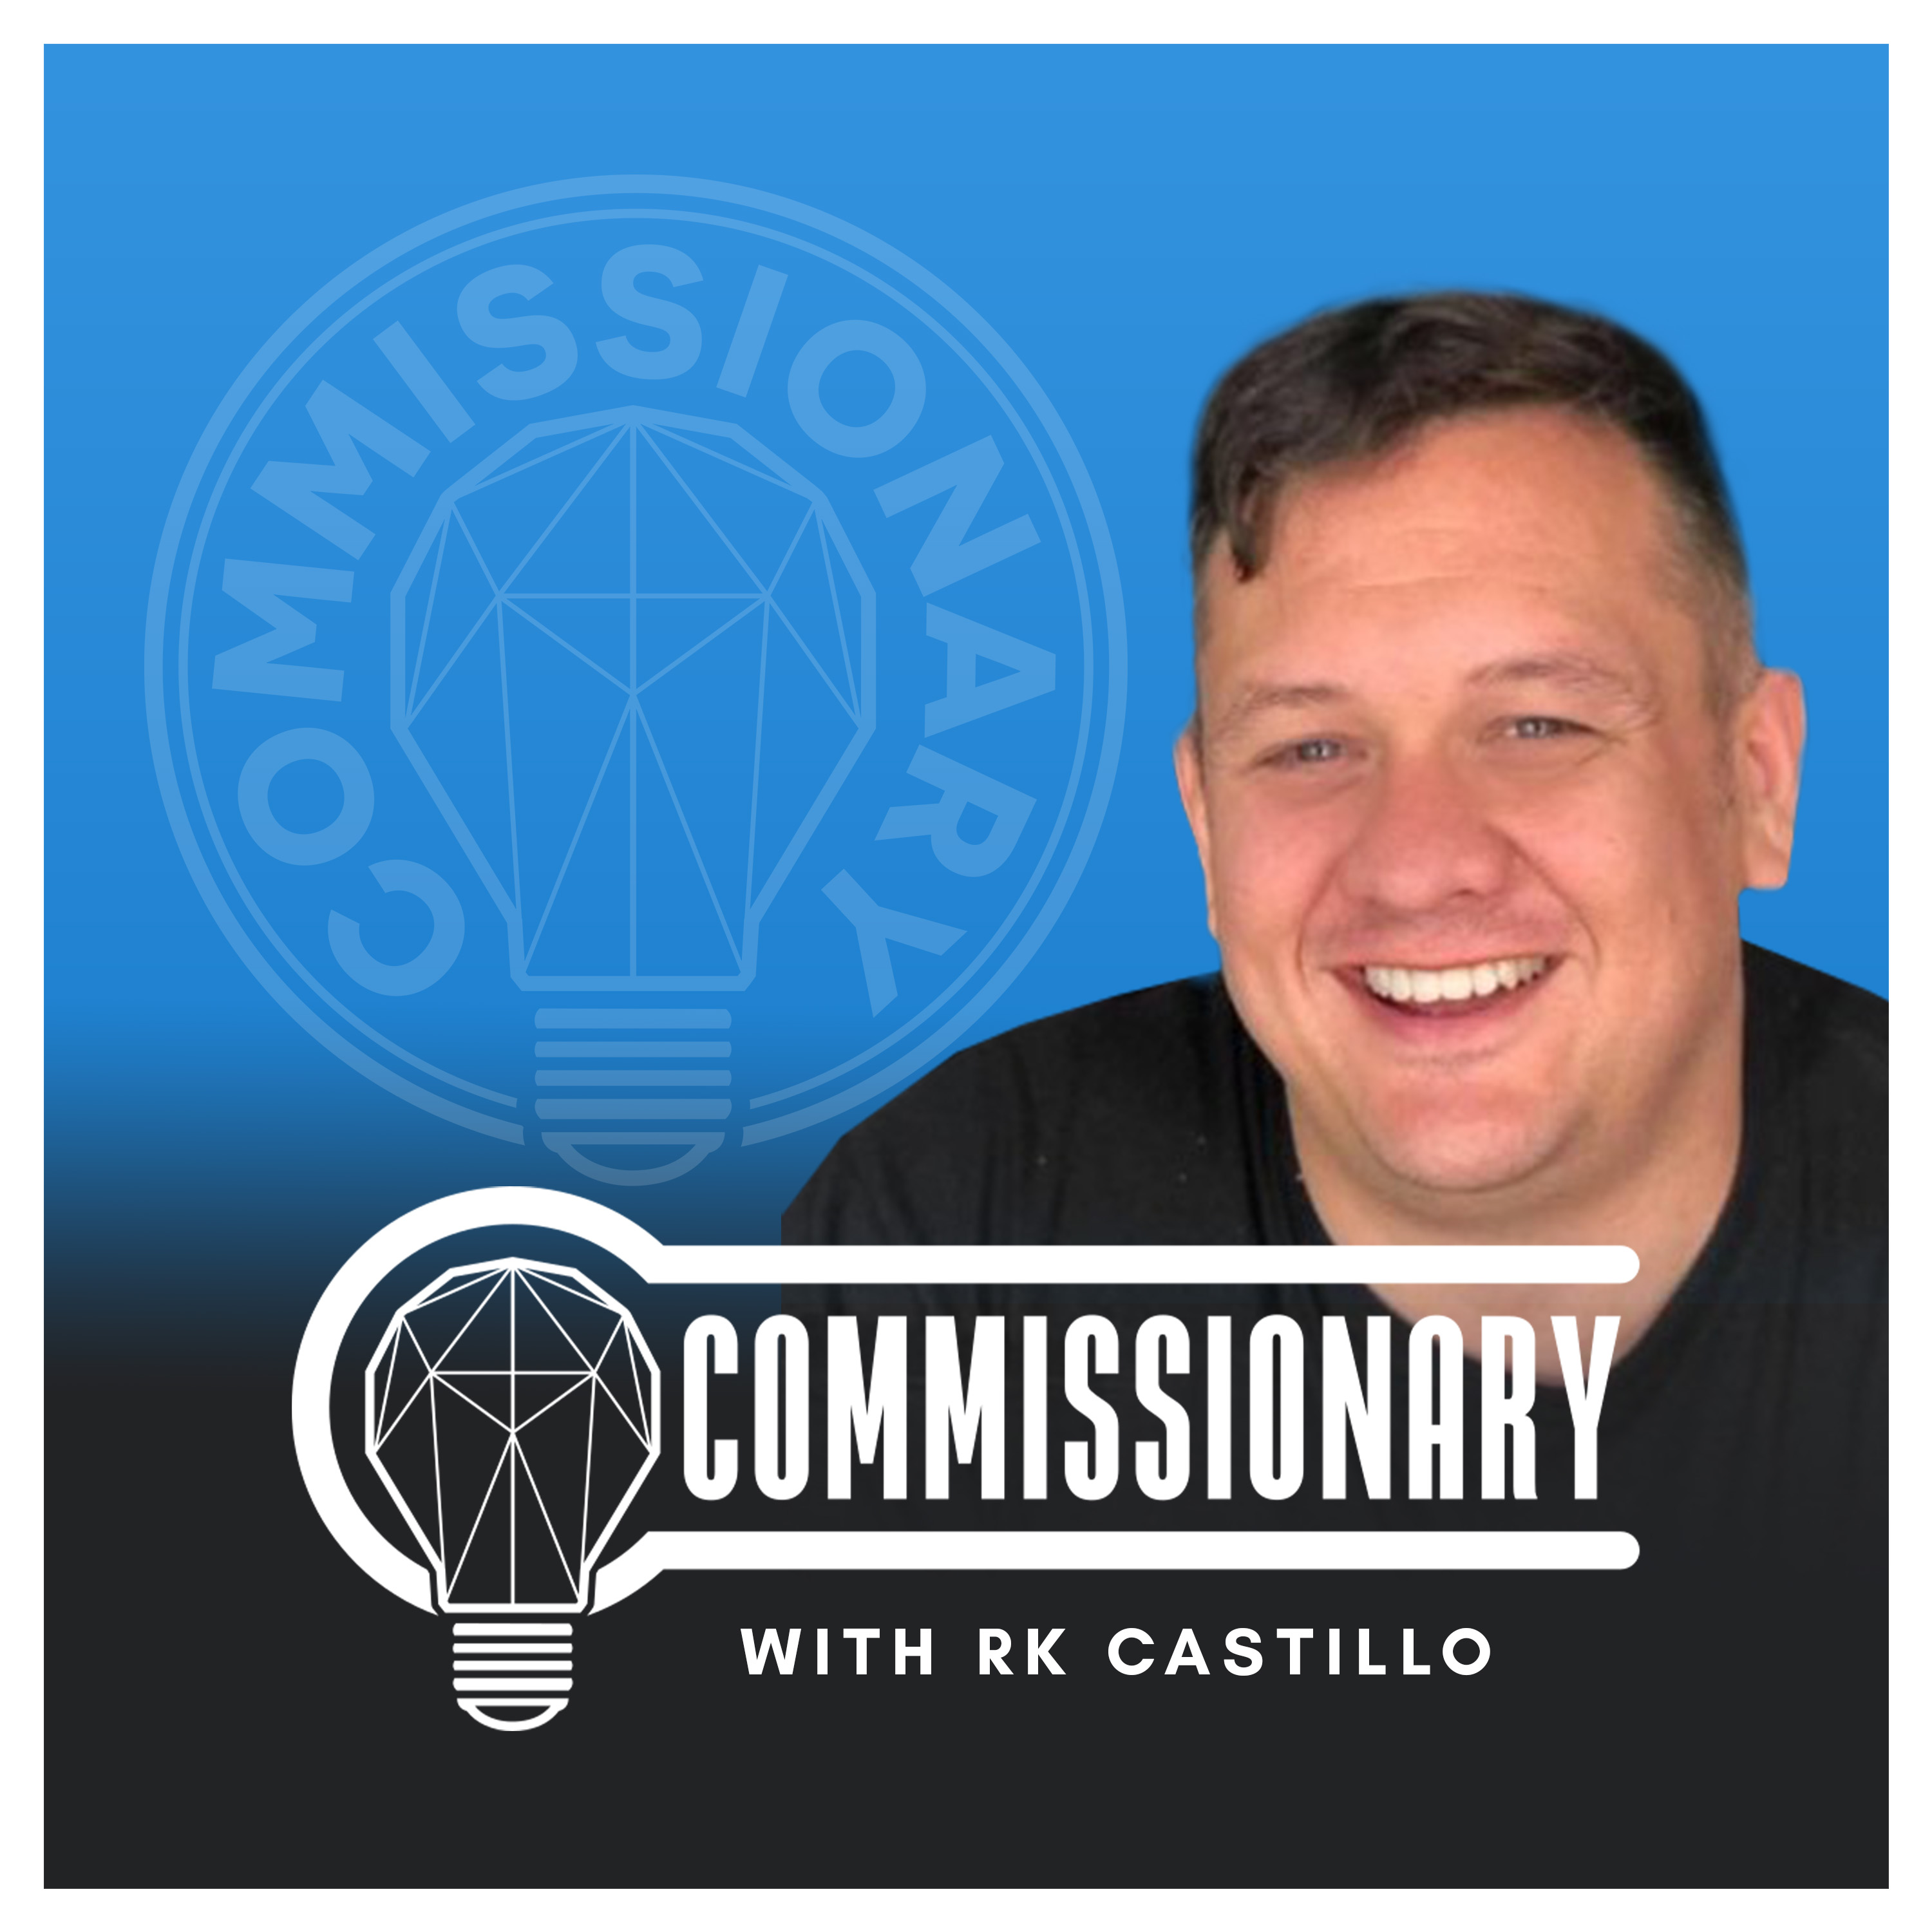 The Commissionary Podcast